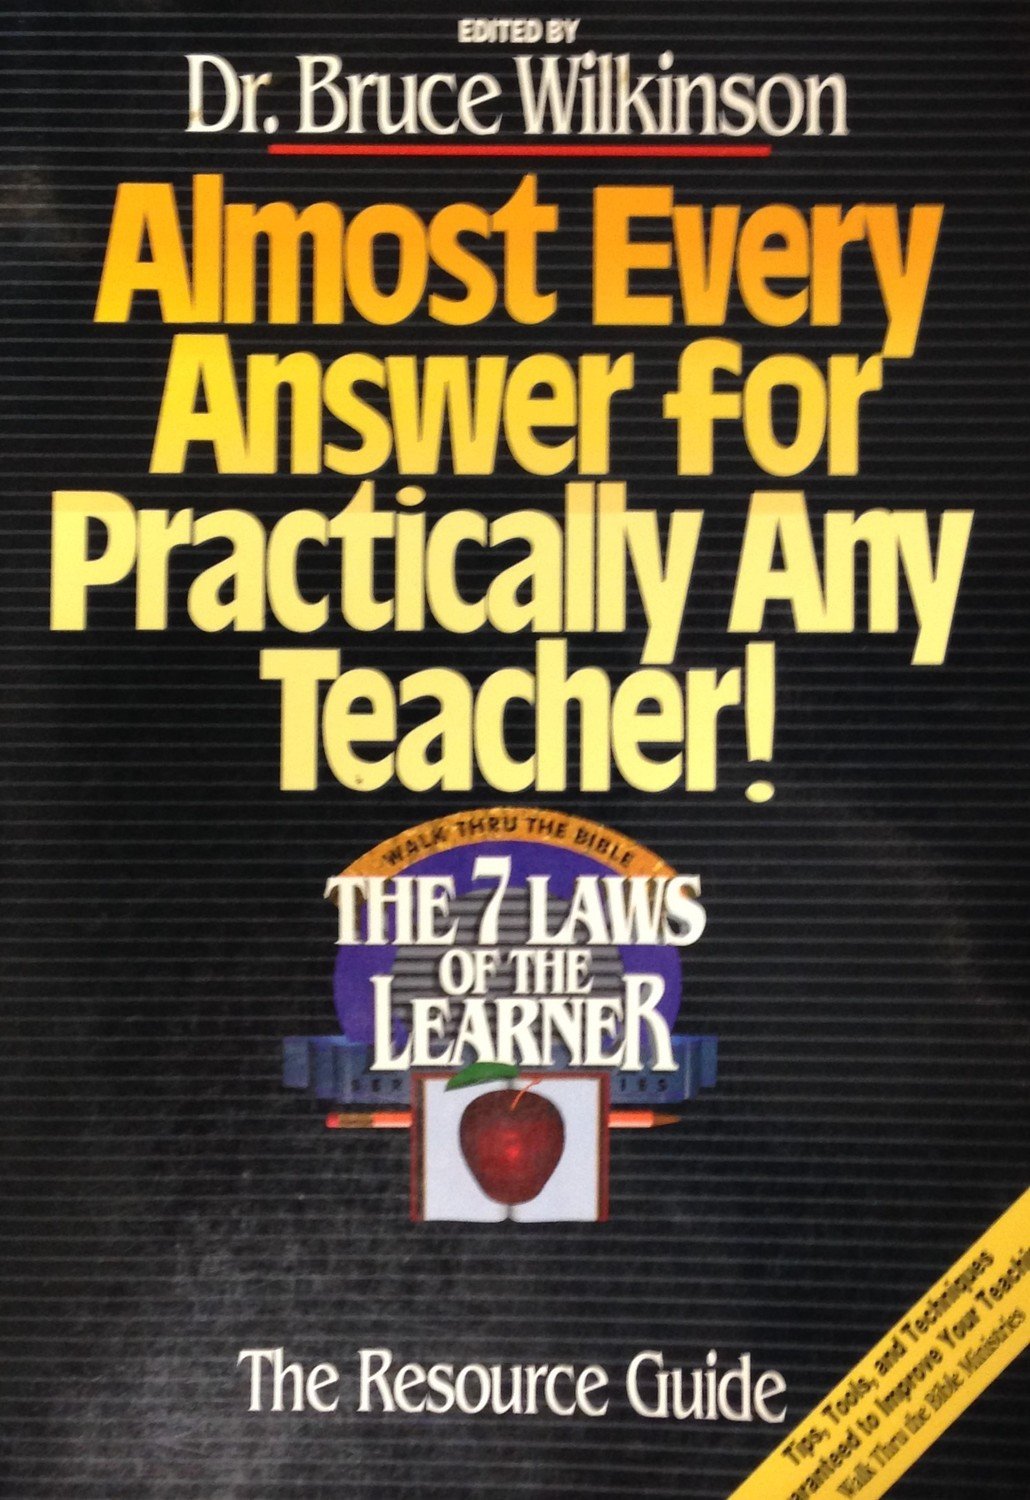 Almost Every Answer for Practically Any Teacher! by Dr. Bruce Wilkinson